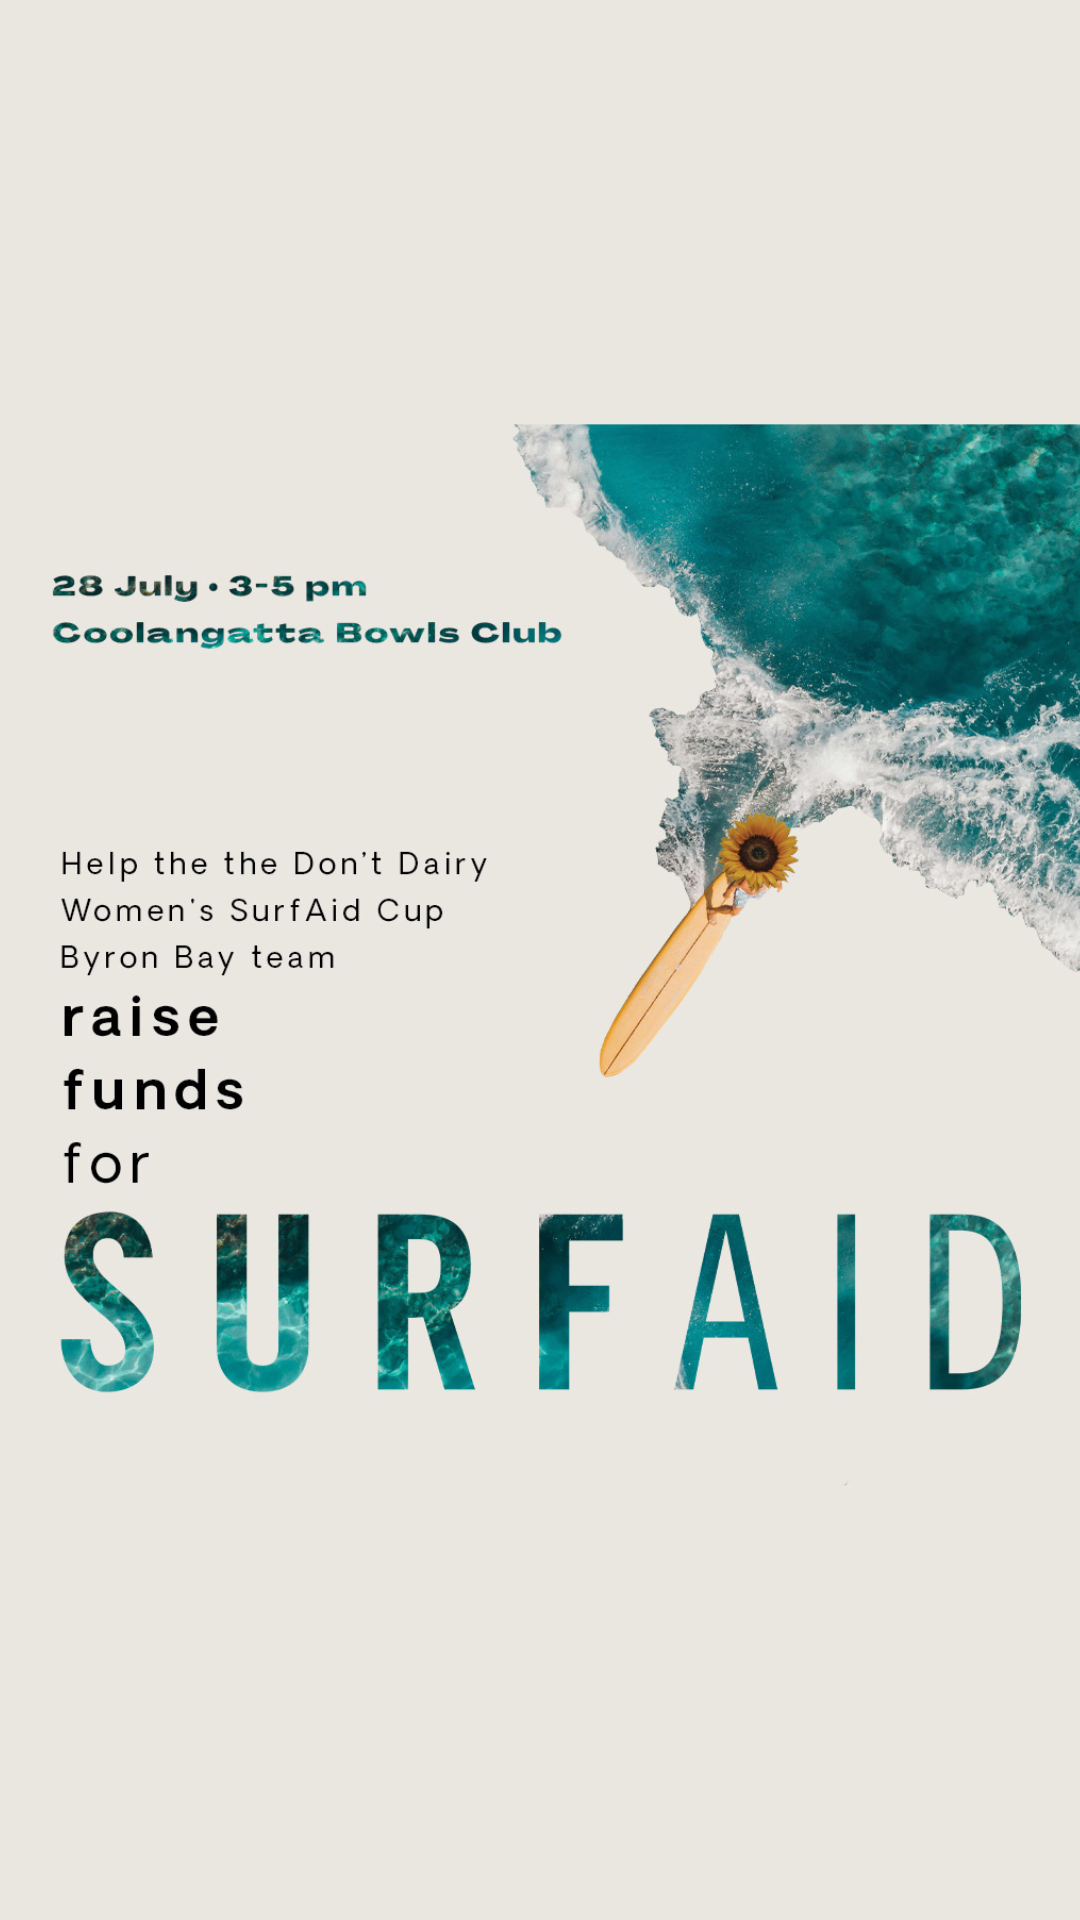 Surf-aid-cup-don't-dairy-fundraiser-barefoot-bowls